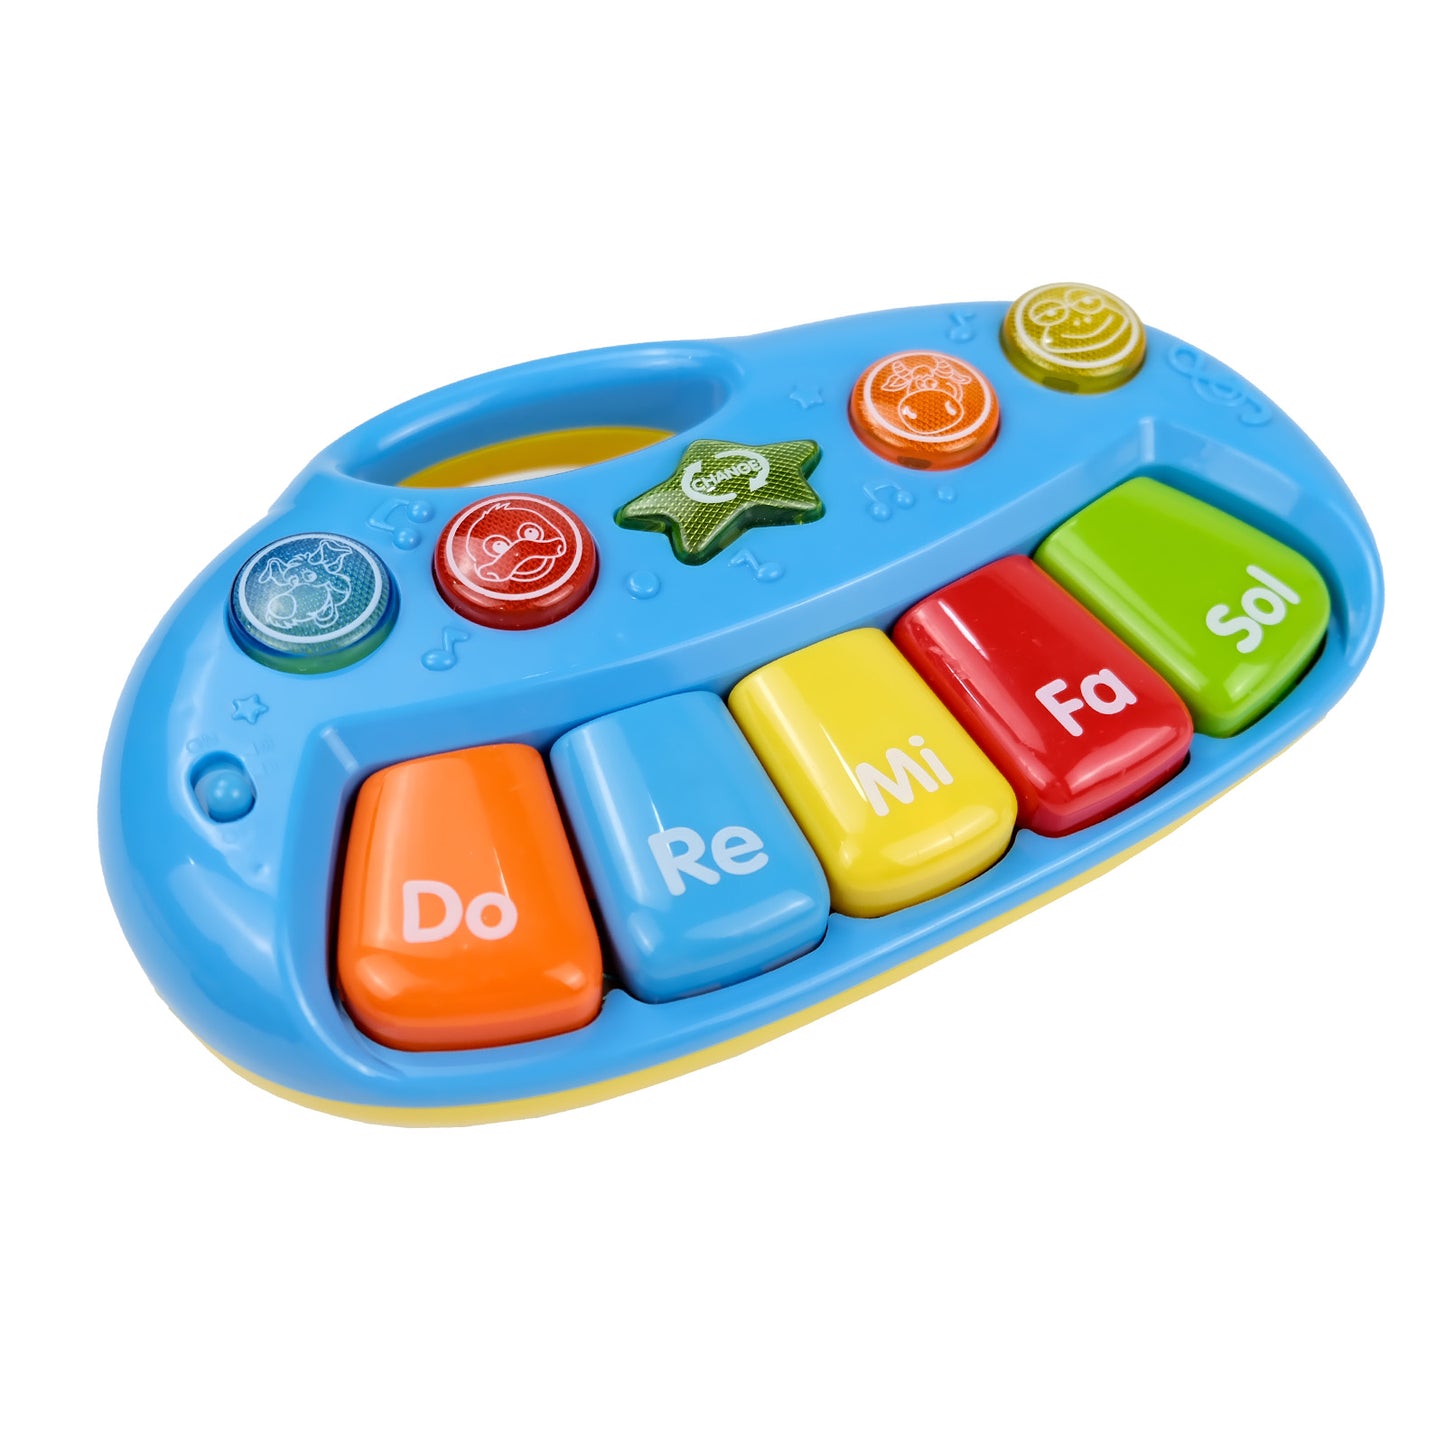 AOQIMITENJOY Musical Instrument Electronic 5 Keys Keyboard Toys LED Lighting Children's Toys Birthday Gifts for Boys and Girls 3 Year Old+ HK-1307A